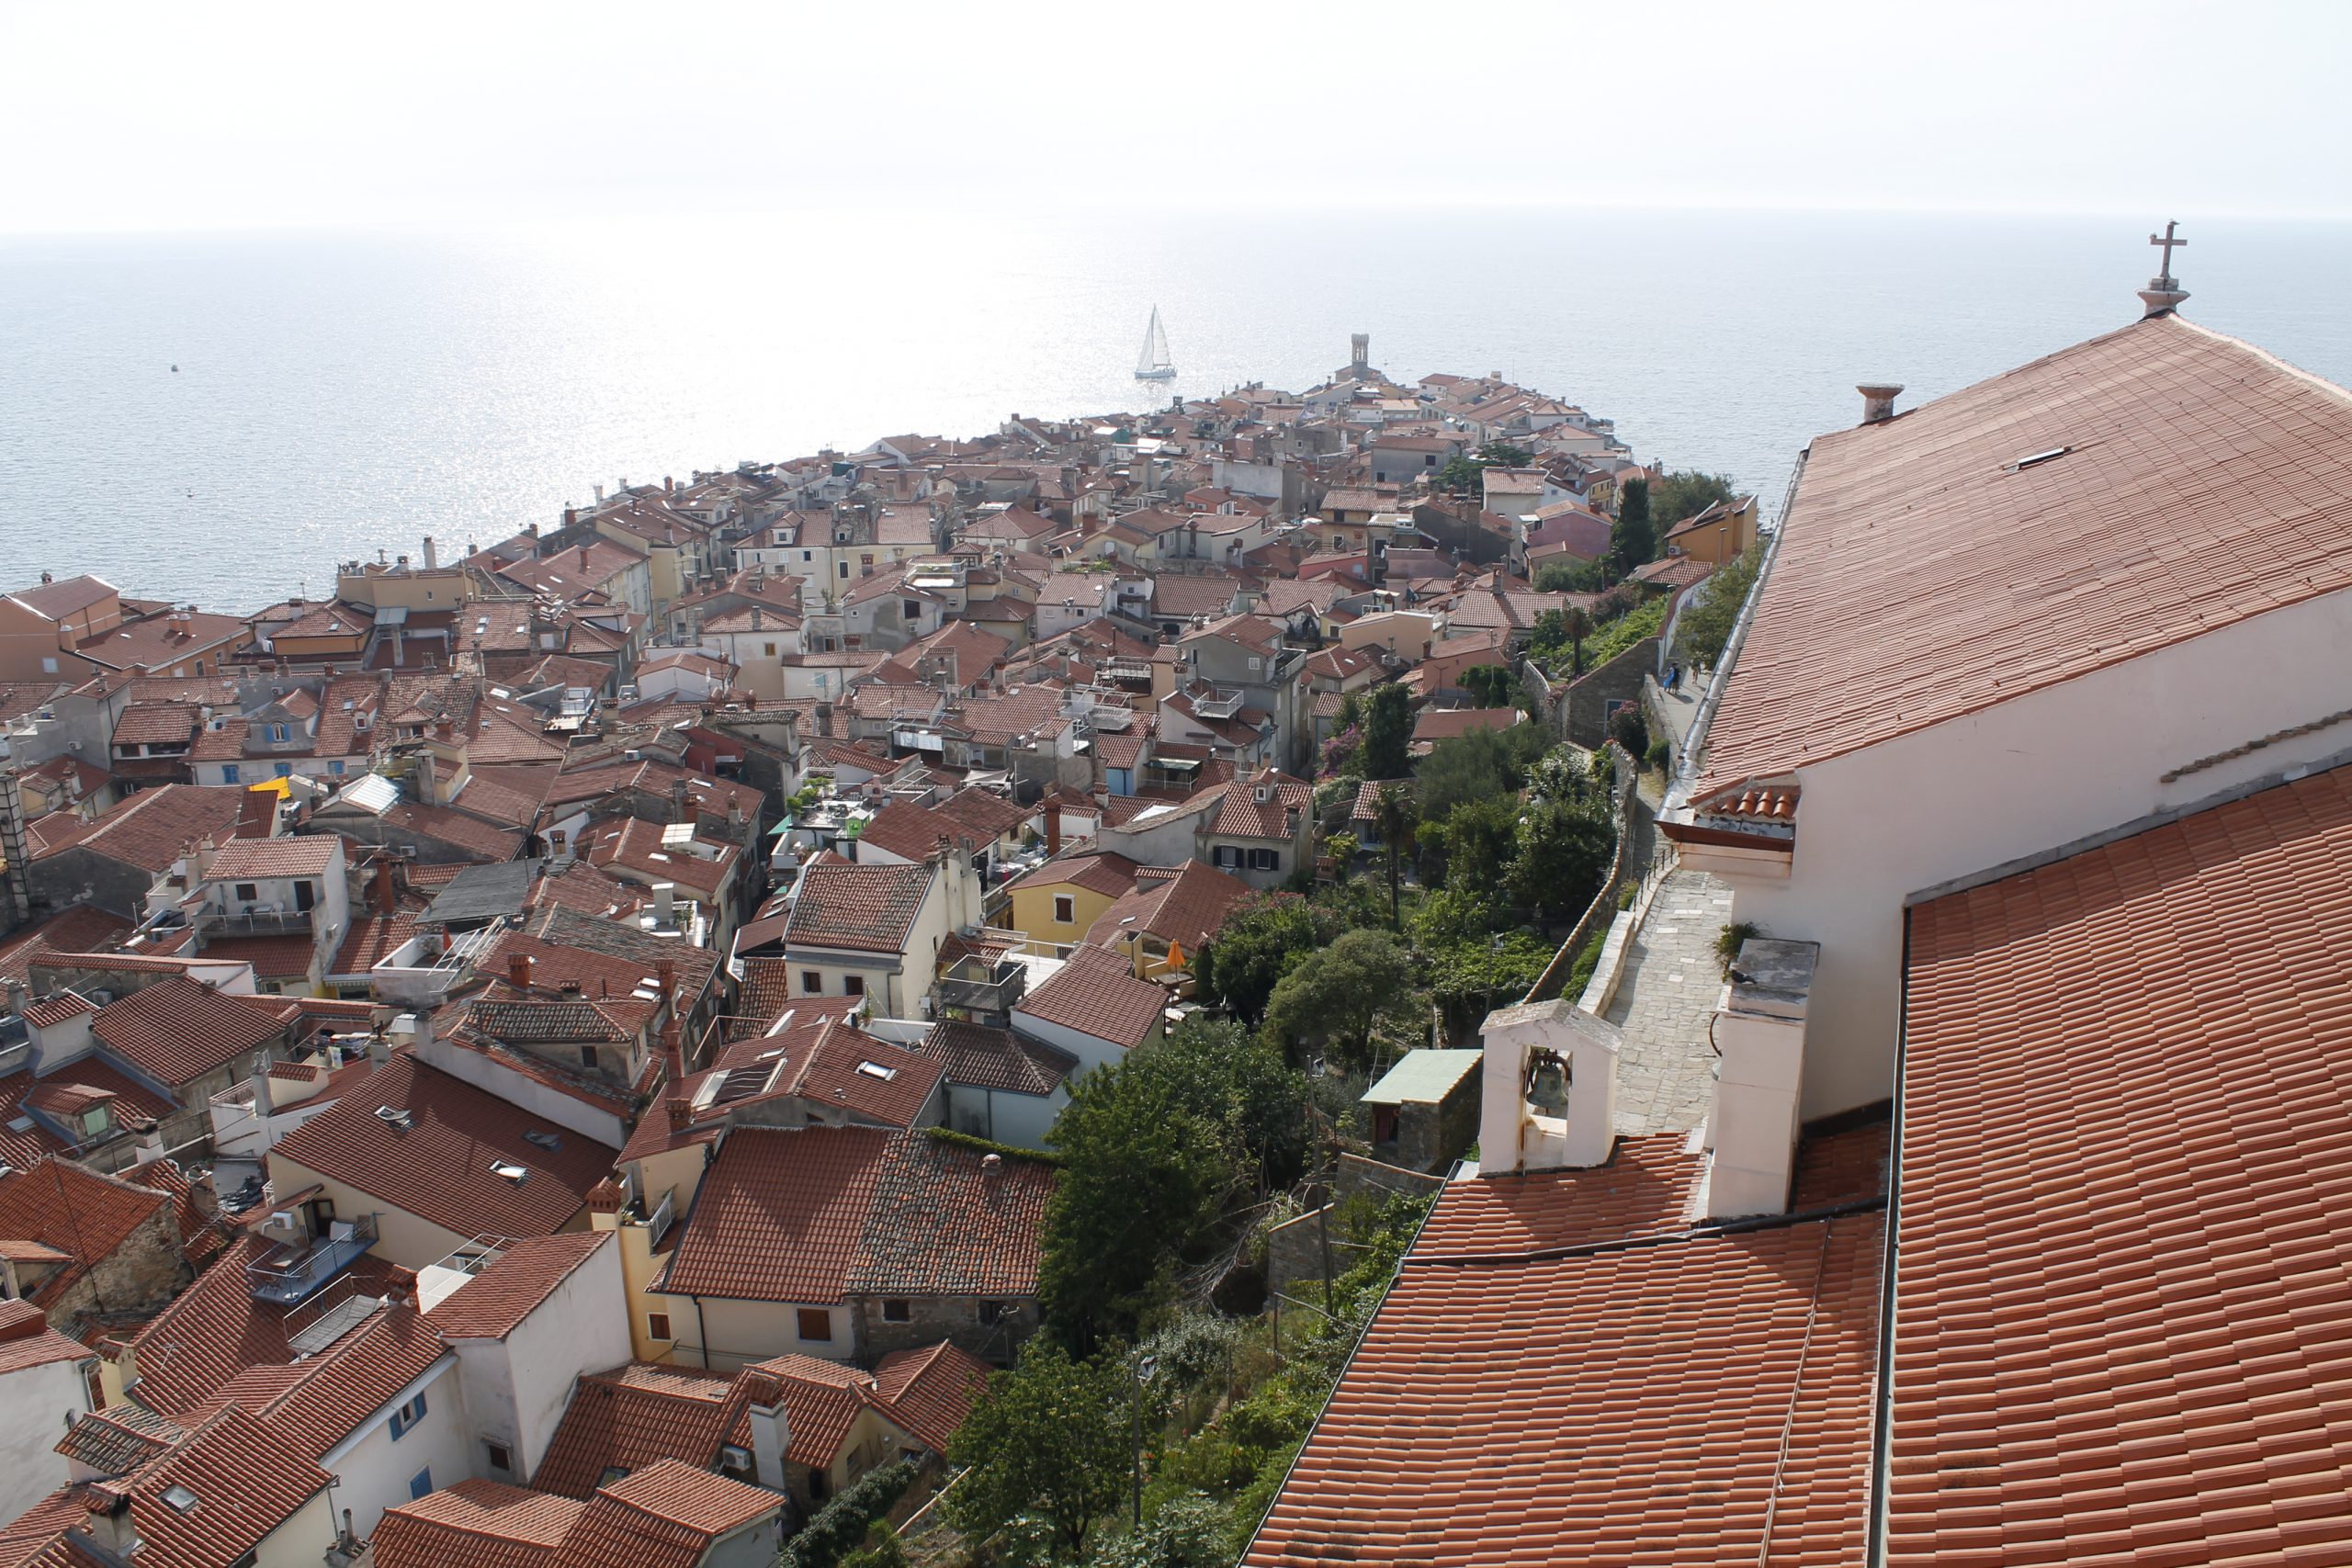 Half day in the lovely coastal town of Piran